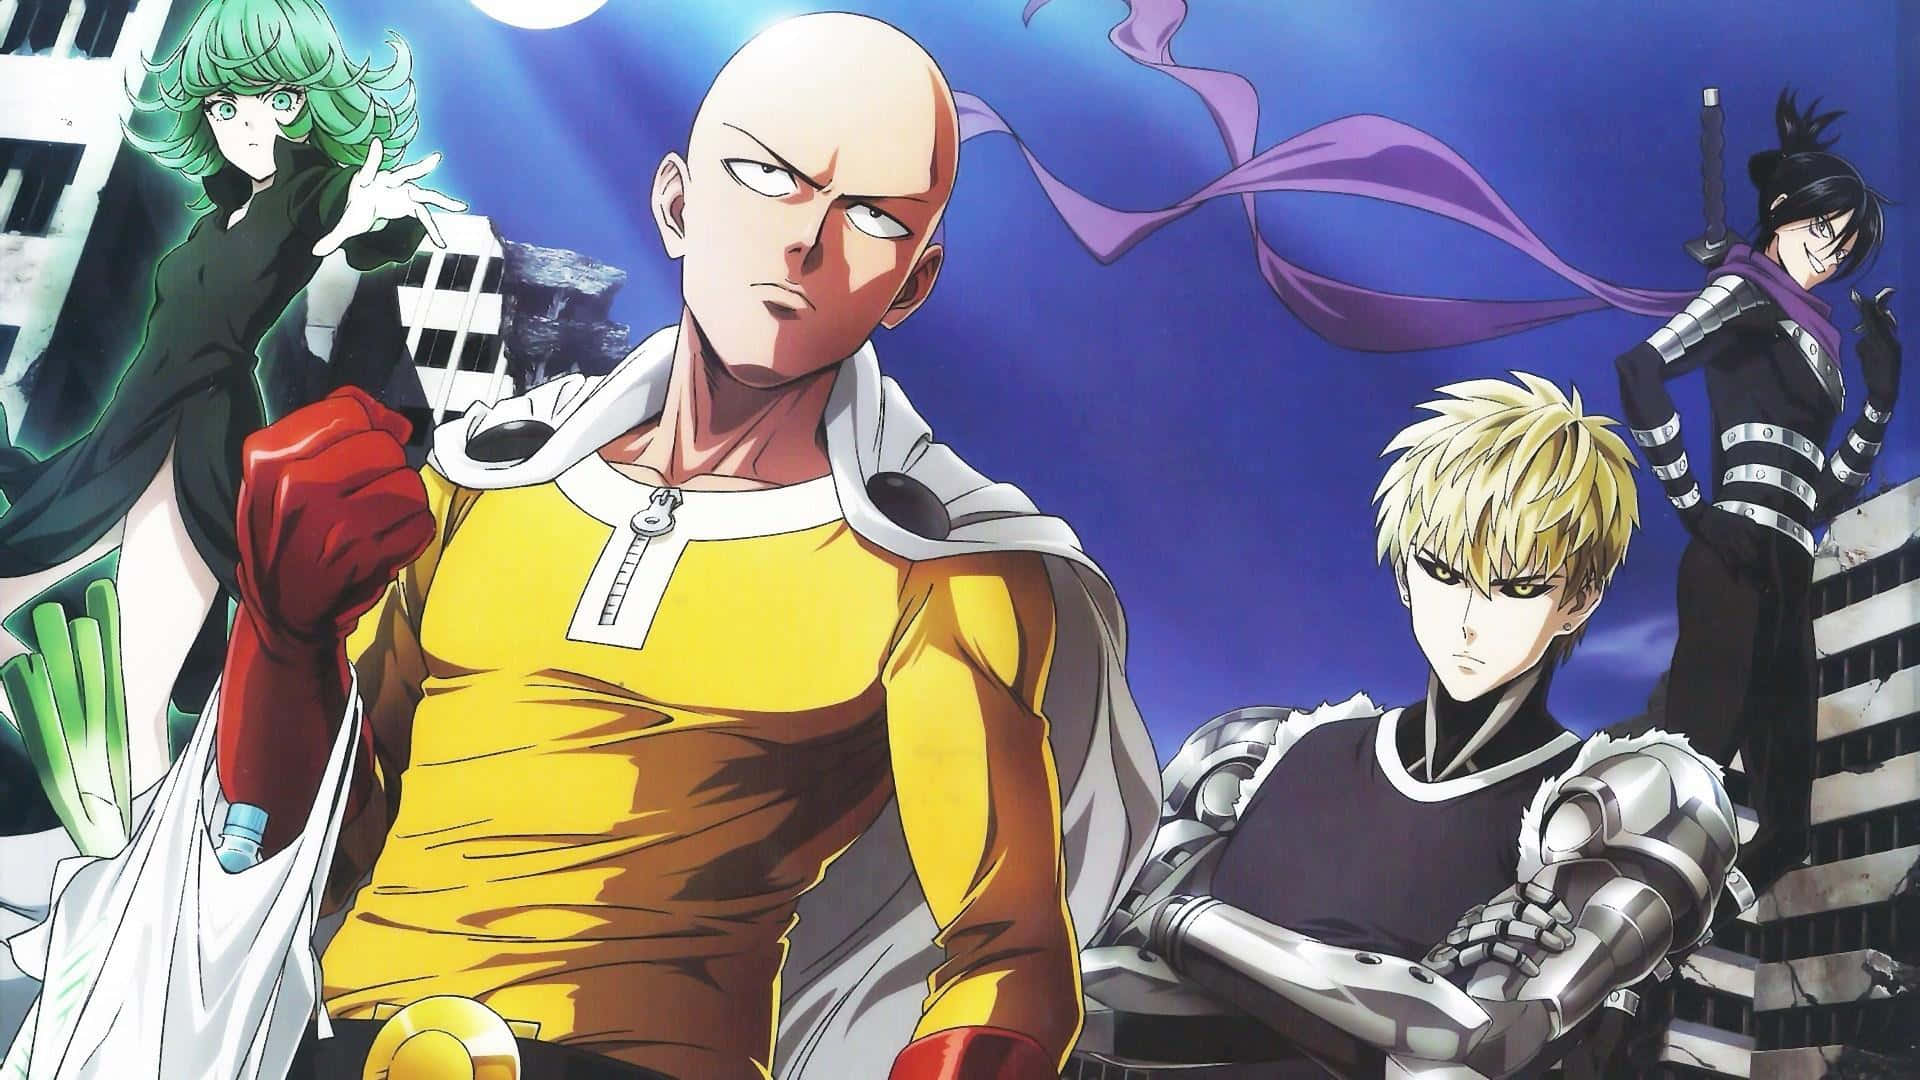 Genos from One Punch Man striking a dynamic pose Wallpaper